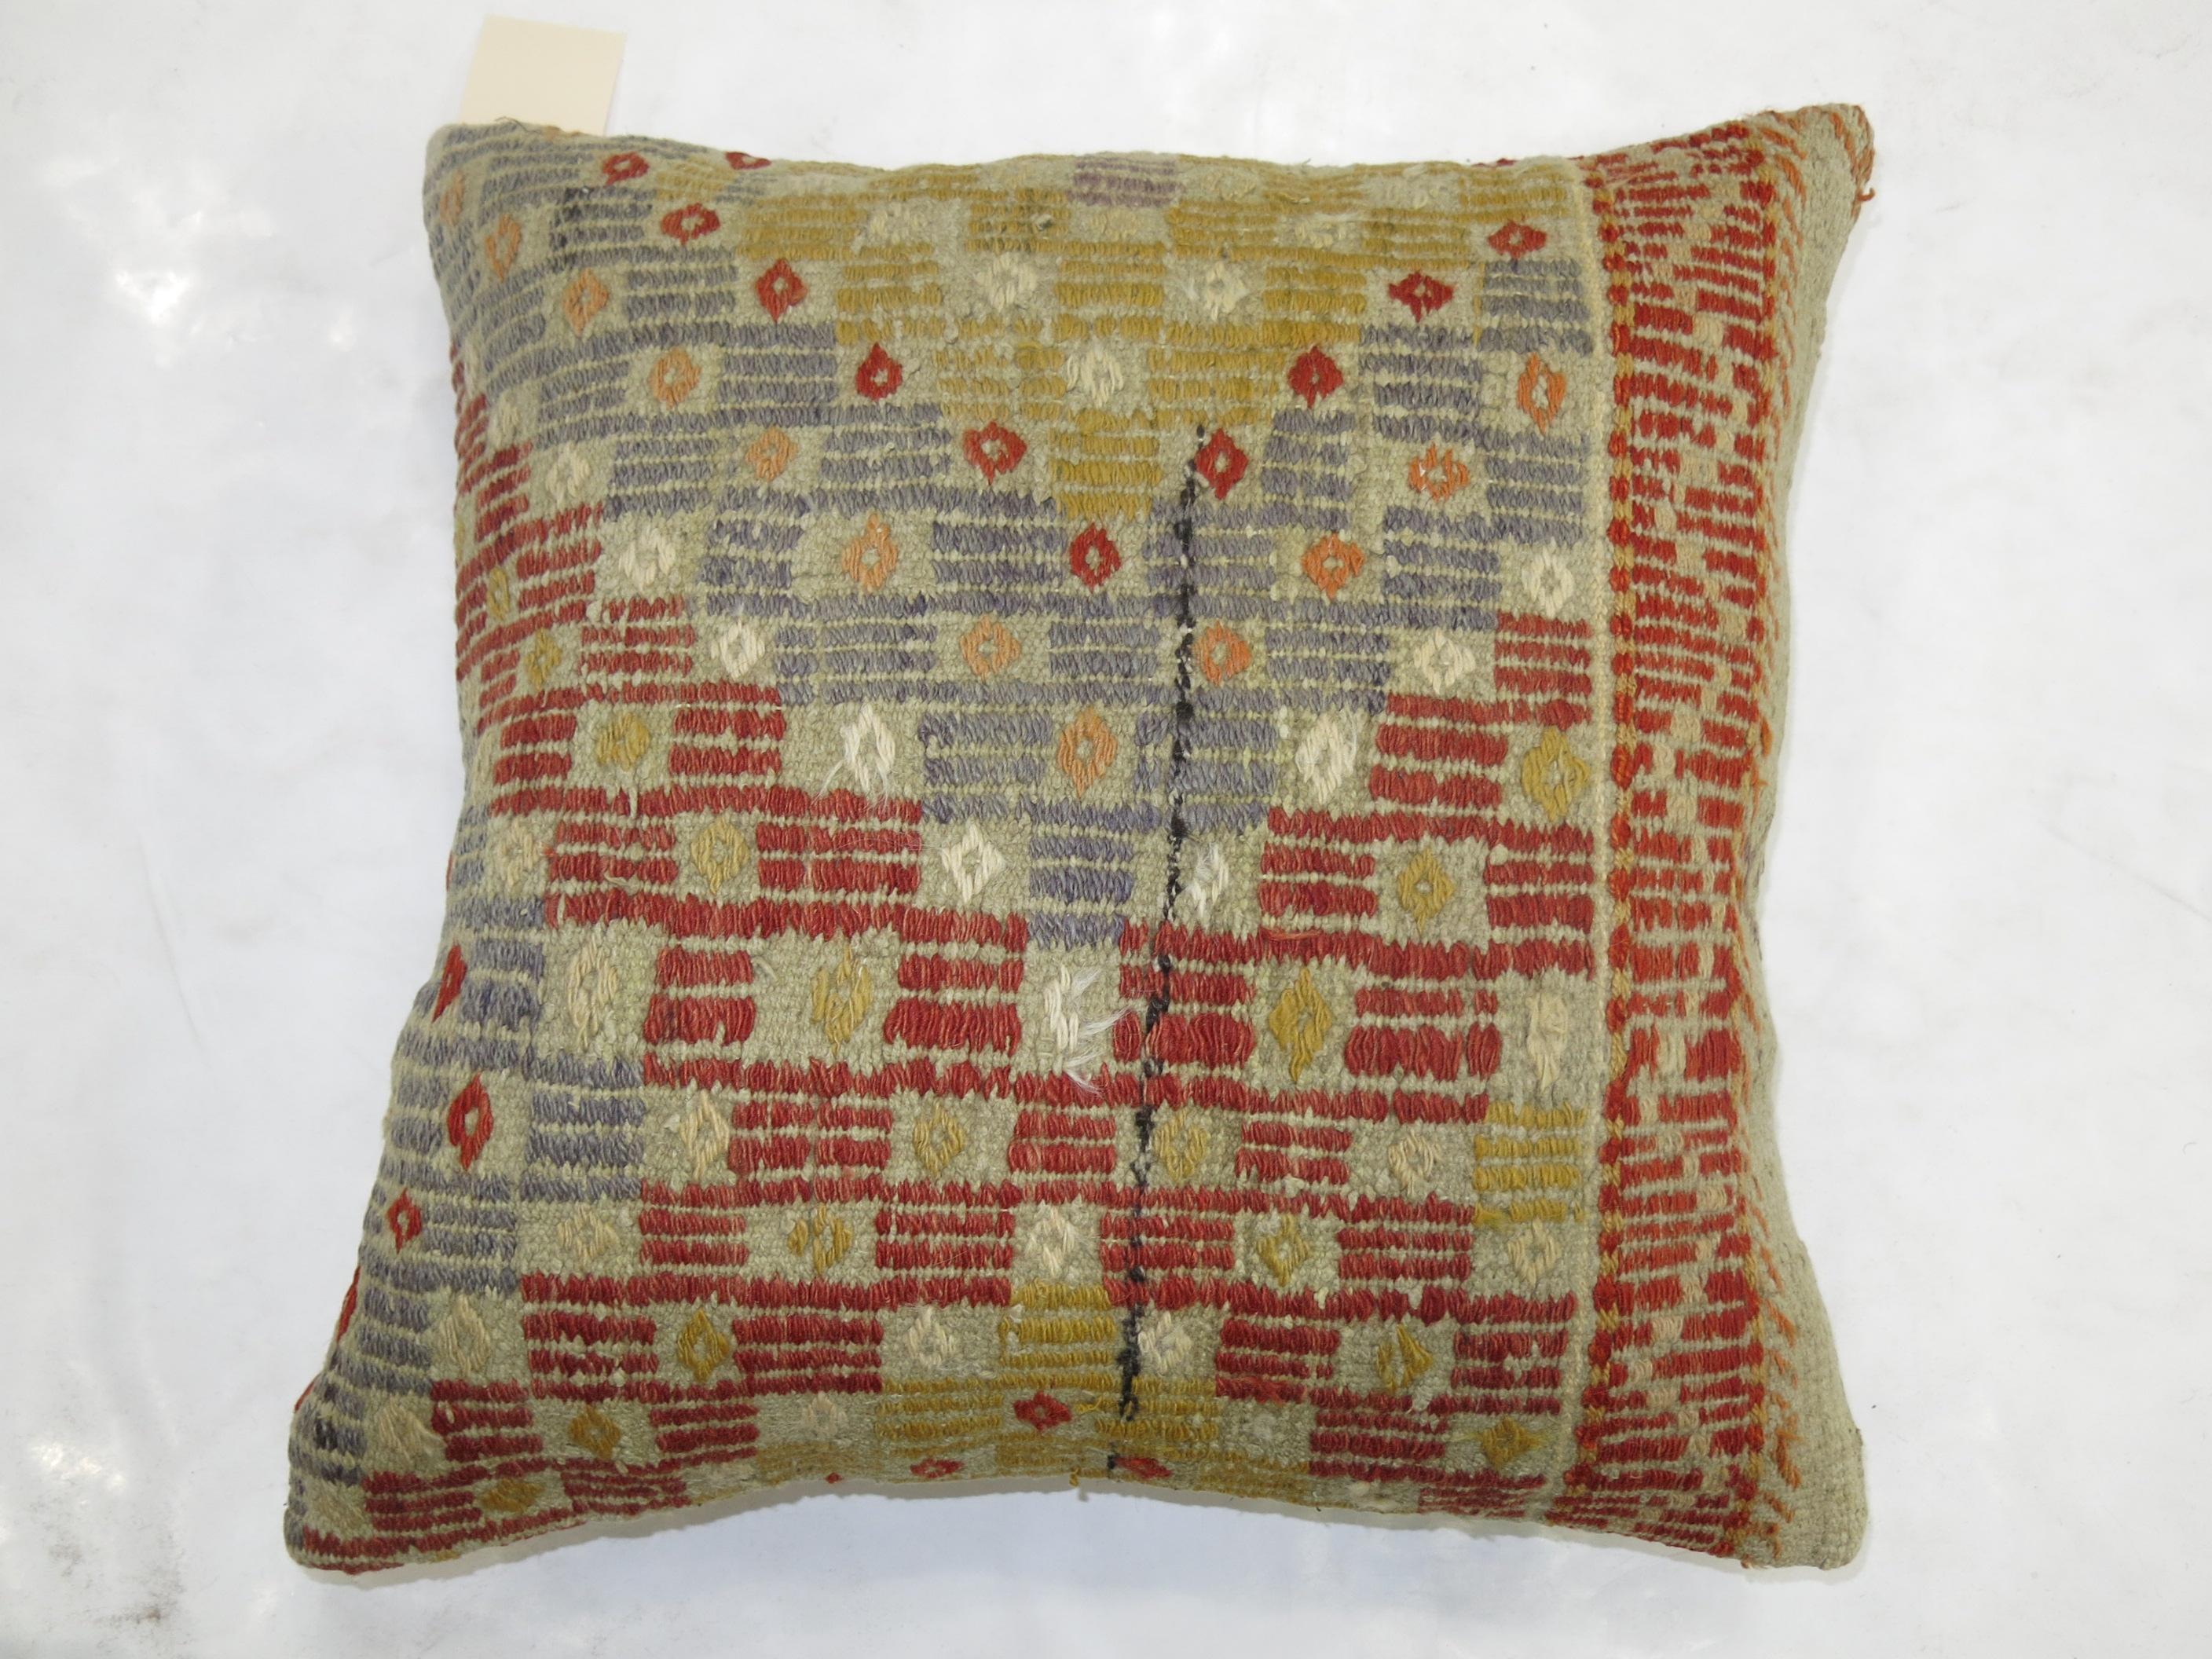 Pillow made from a Turkish flat-weave rug

Measures: 19'' x 19''.